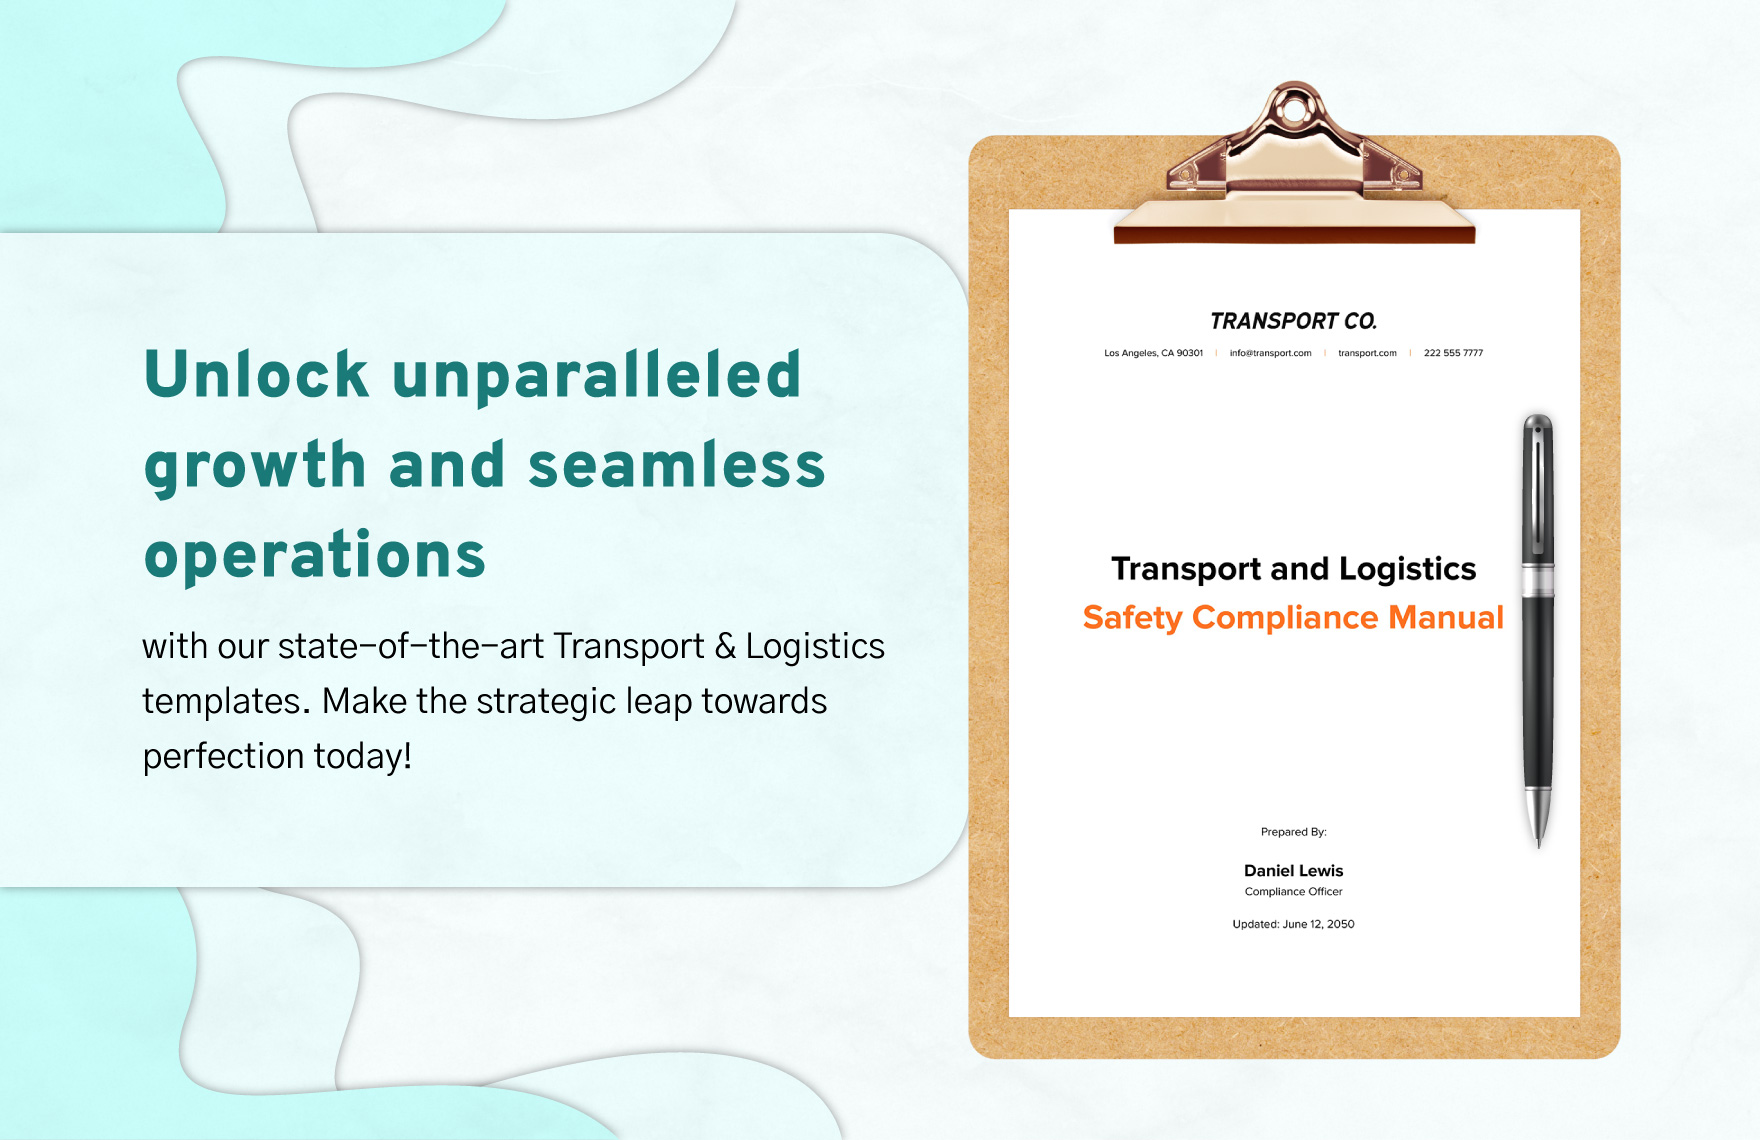 Transport and Logistics Safety Compliance Manual Template